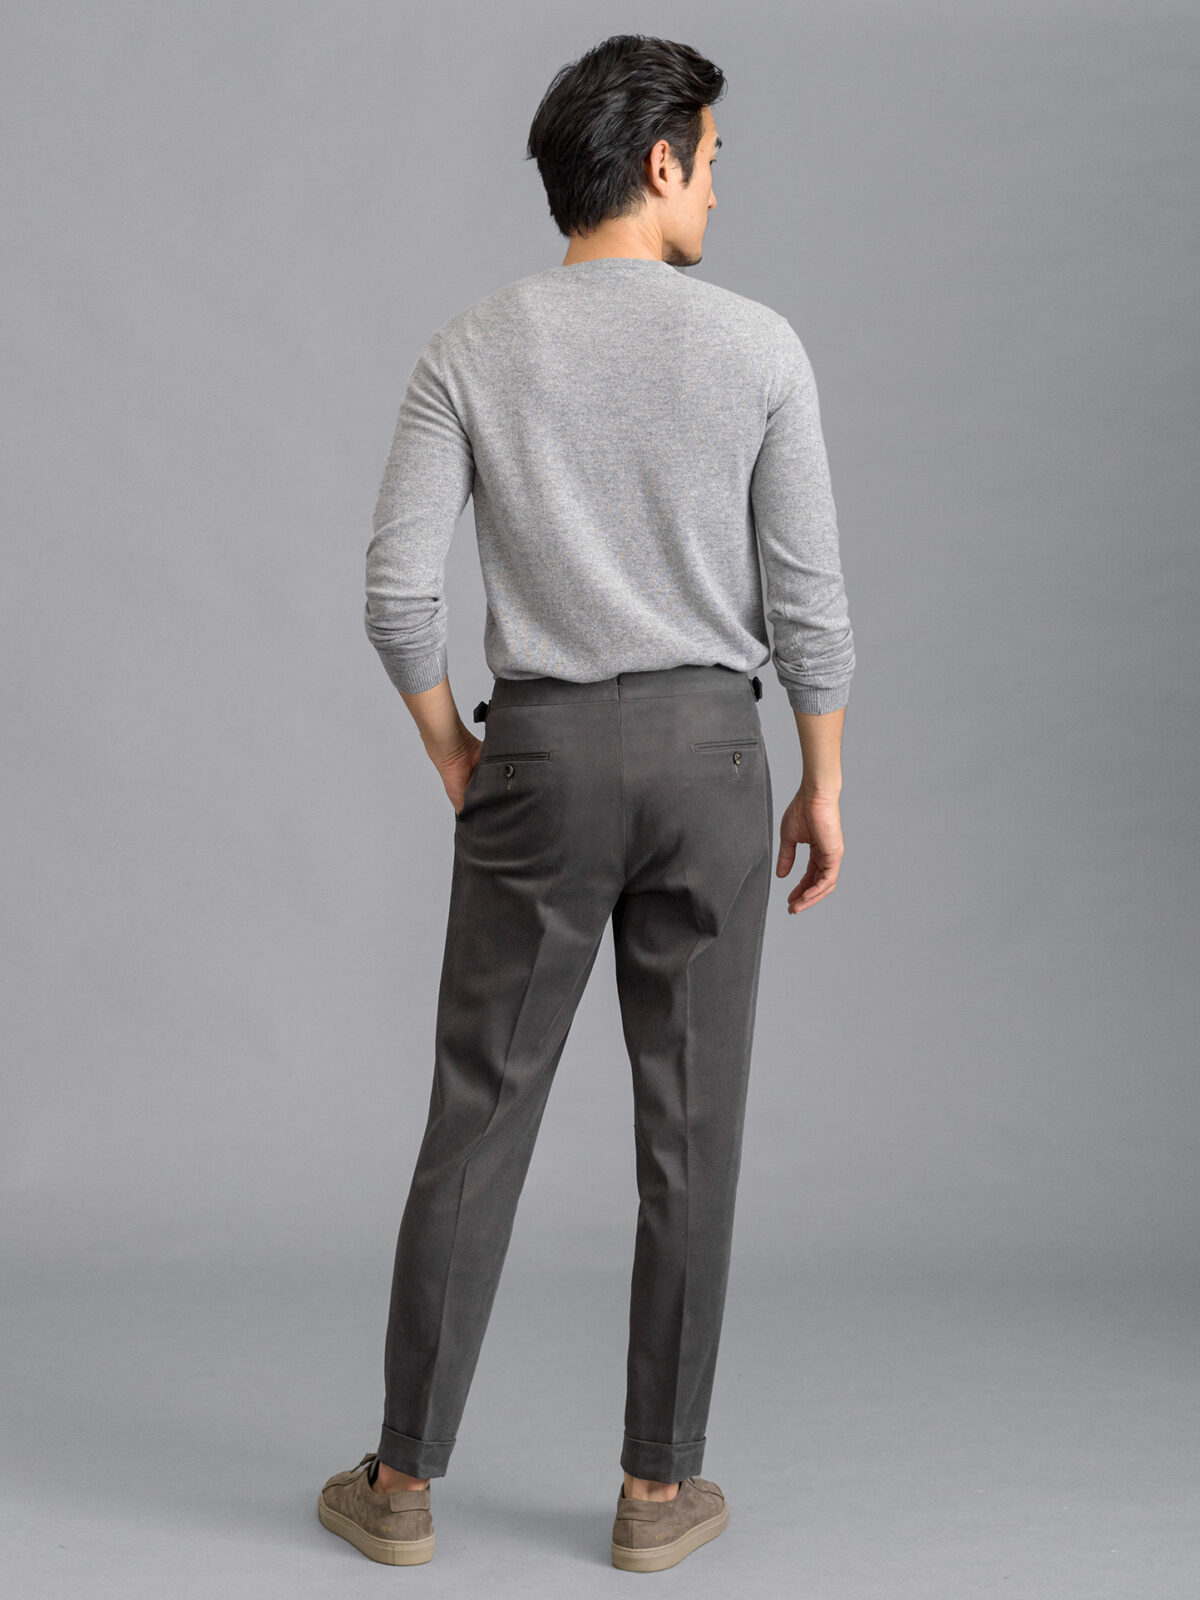 Off-White Pleated Duca Trousers in Pure Cotton